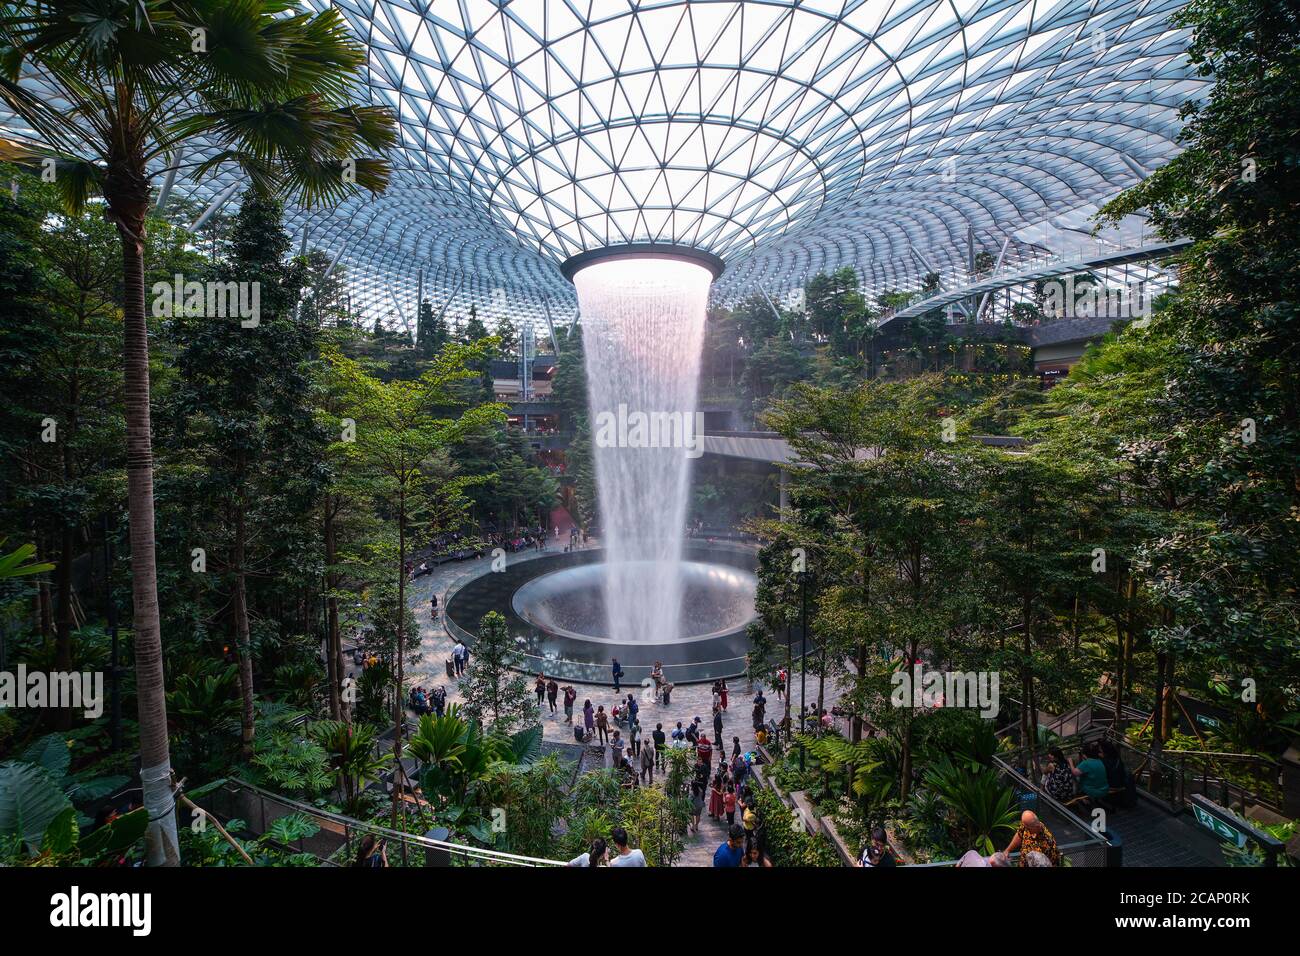 The Rain Vortex, a 40m-tall indoor waterfall located inside the Jewel Changi Airport in Singapore. Jewel Changi Airport is set to open on April 17, 20 Stock Photo